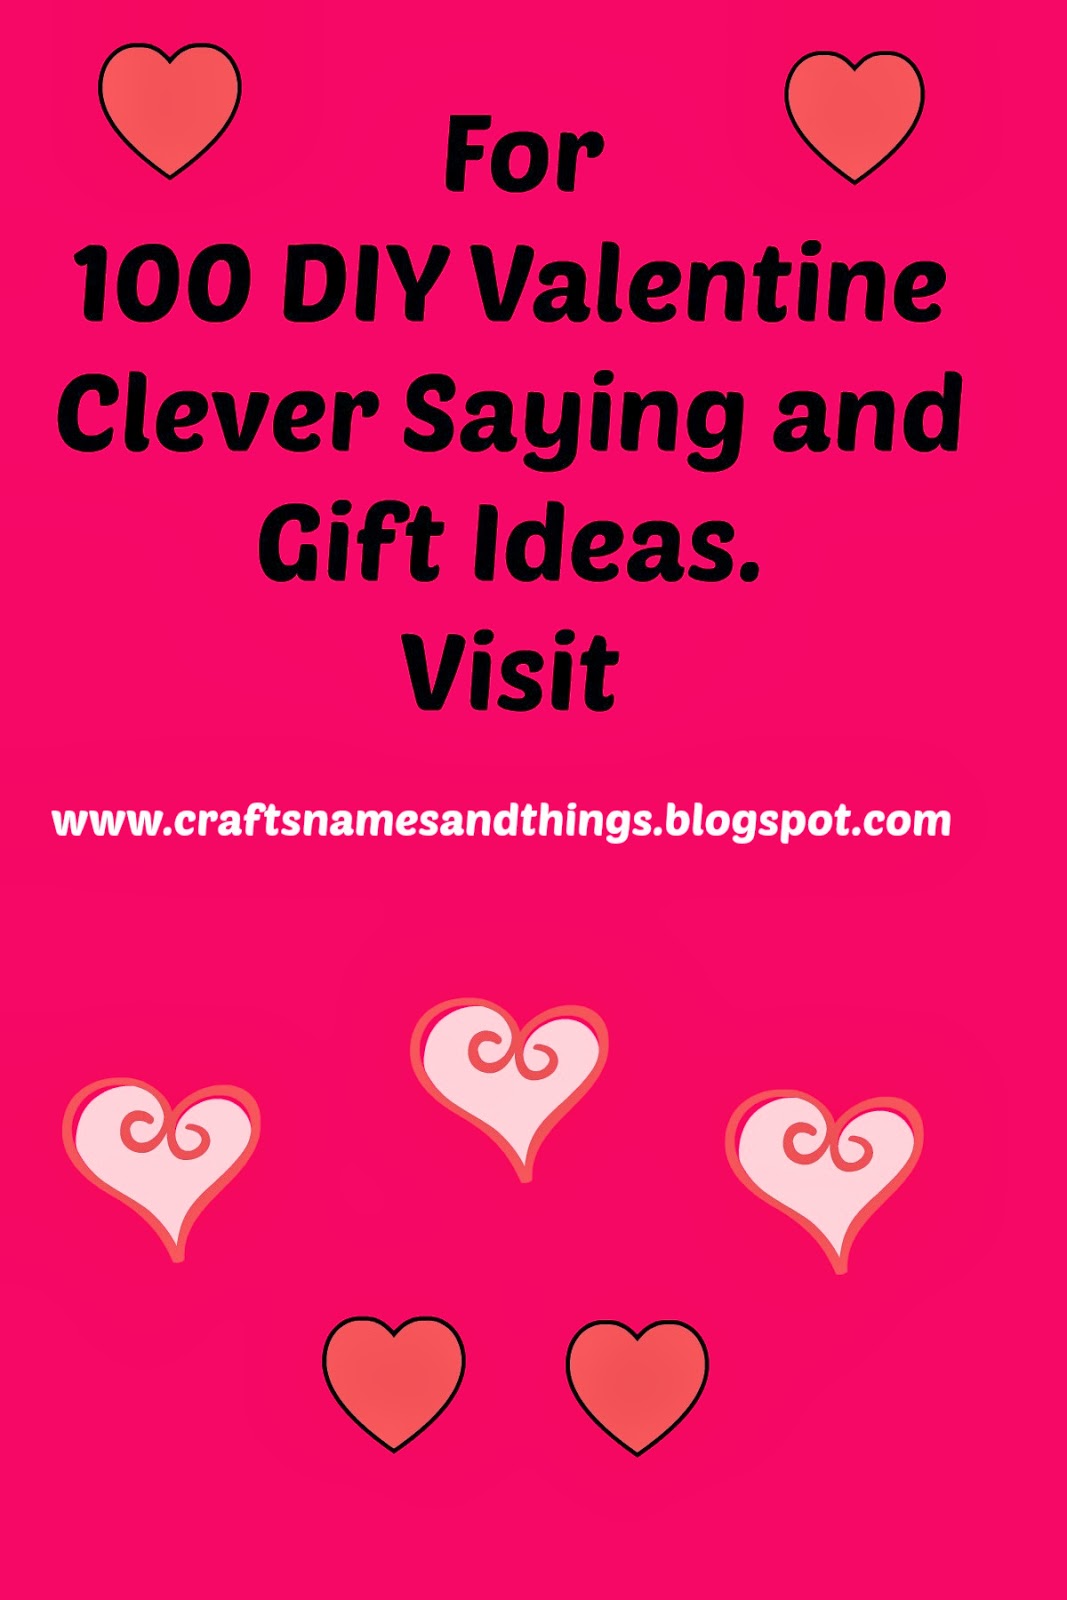 Crafts, Names, And Things!: 100 DIY Valentine Ideas and Clever Sayings: The Second 50 ...1067 x 1600